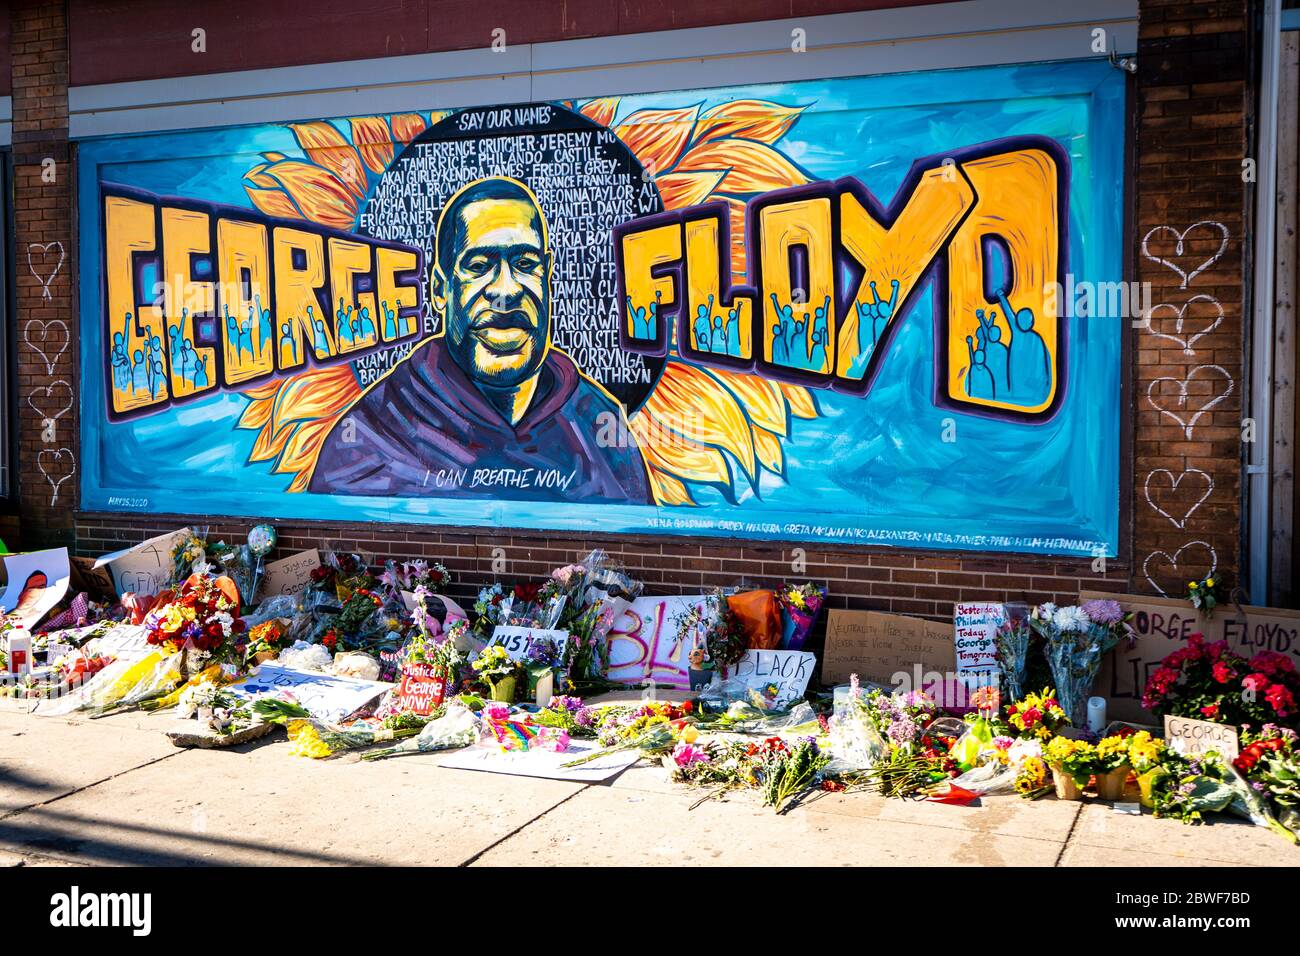 A mural dedicated to George Floyd  and honoring the black lives matter movement in Minneapolis, MN on May 29, 2020. Protests against police brutality continued across the country this weekend over the death of George Floyd, whose death while in police custody was captured on video. (Photo by munshots/Sipa USA) Stock Photo